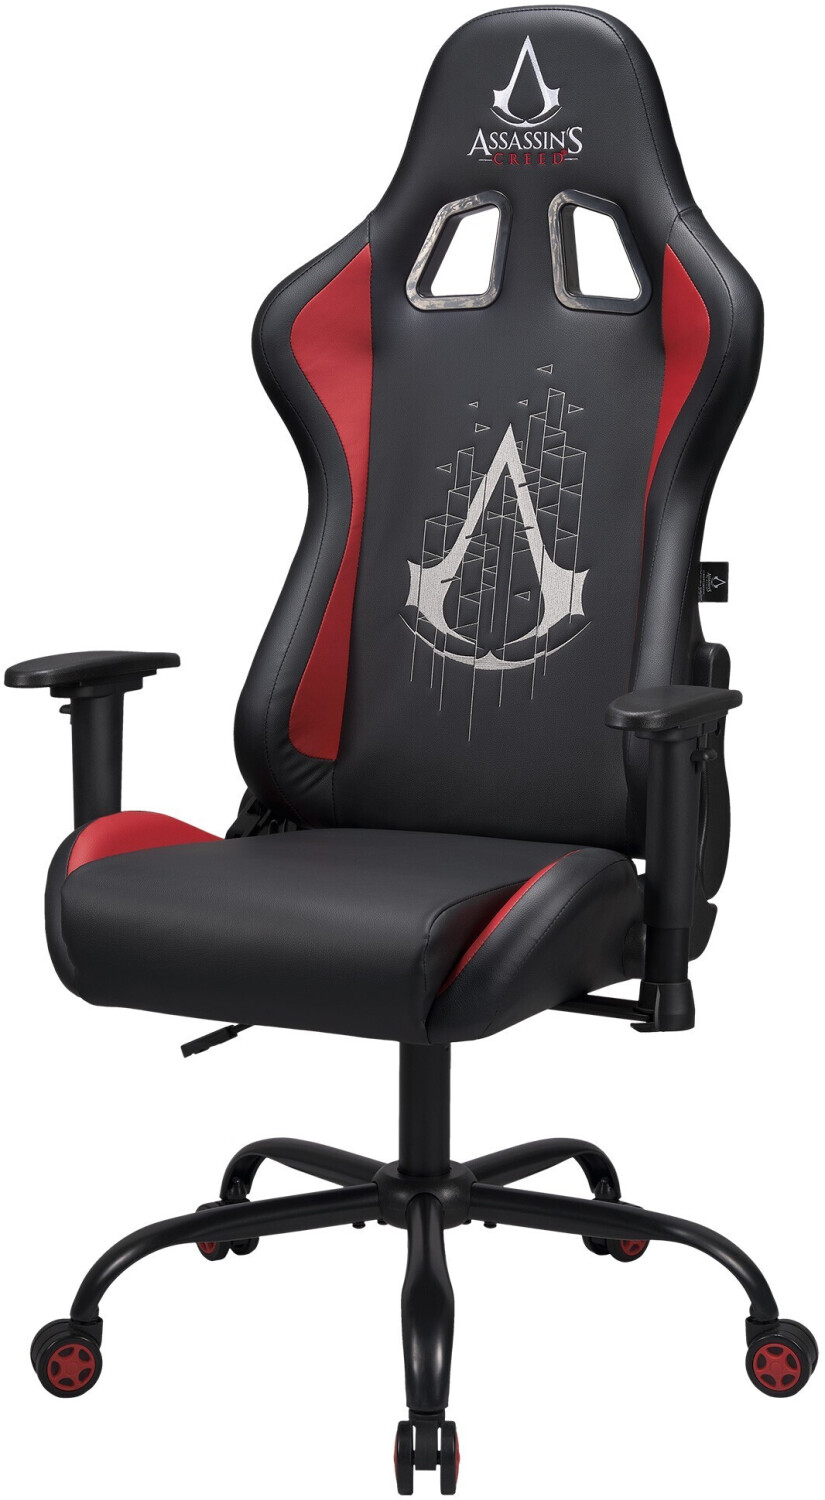 SuBsonic Gaming Chair - Assassins Creed Stuhl